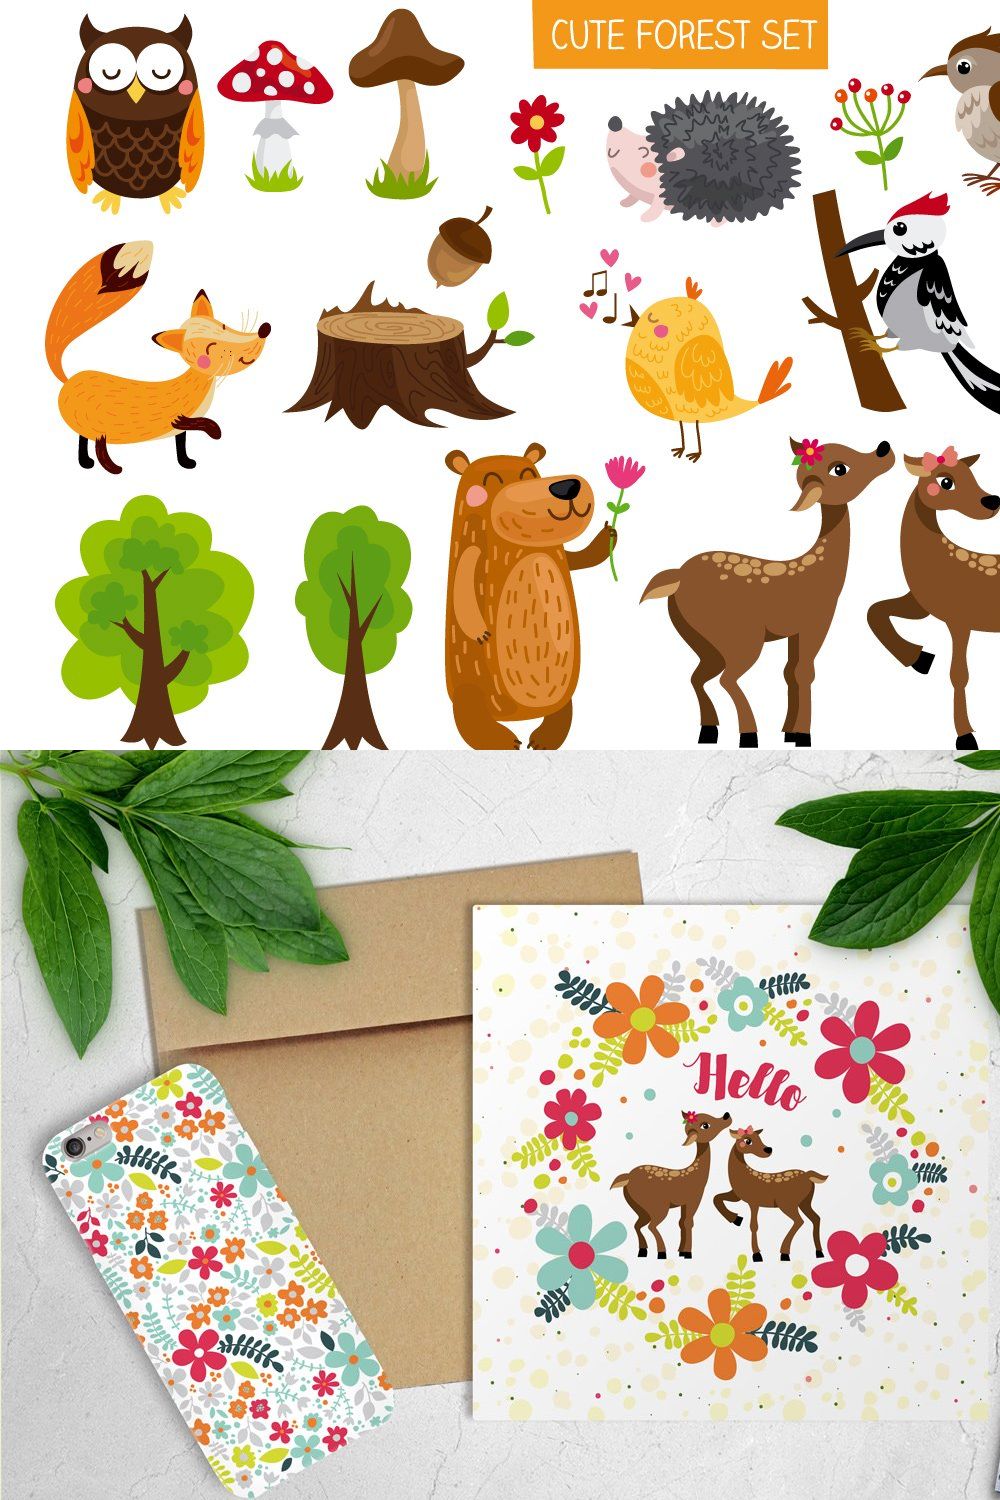 Cute forest set pinterest preview image.